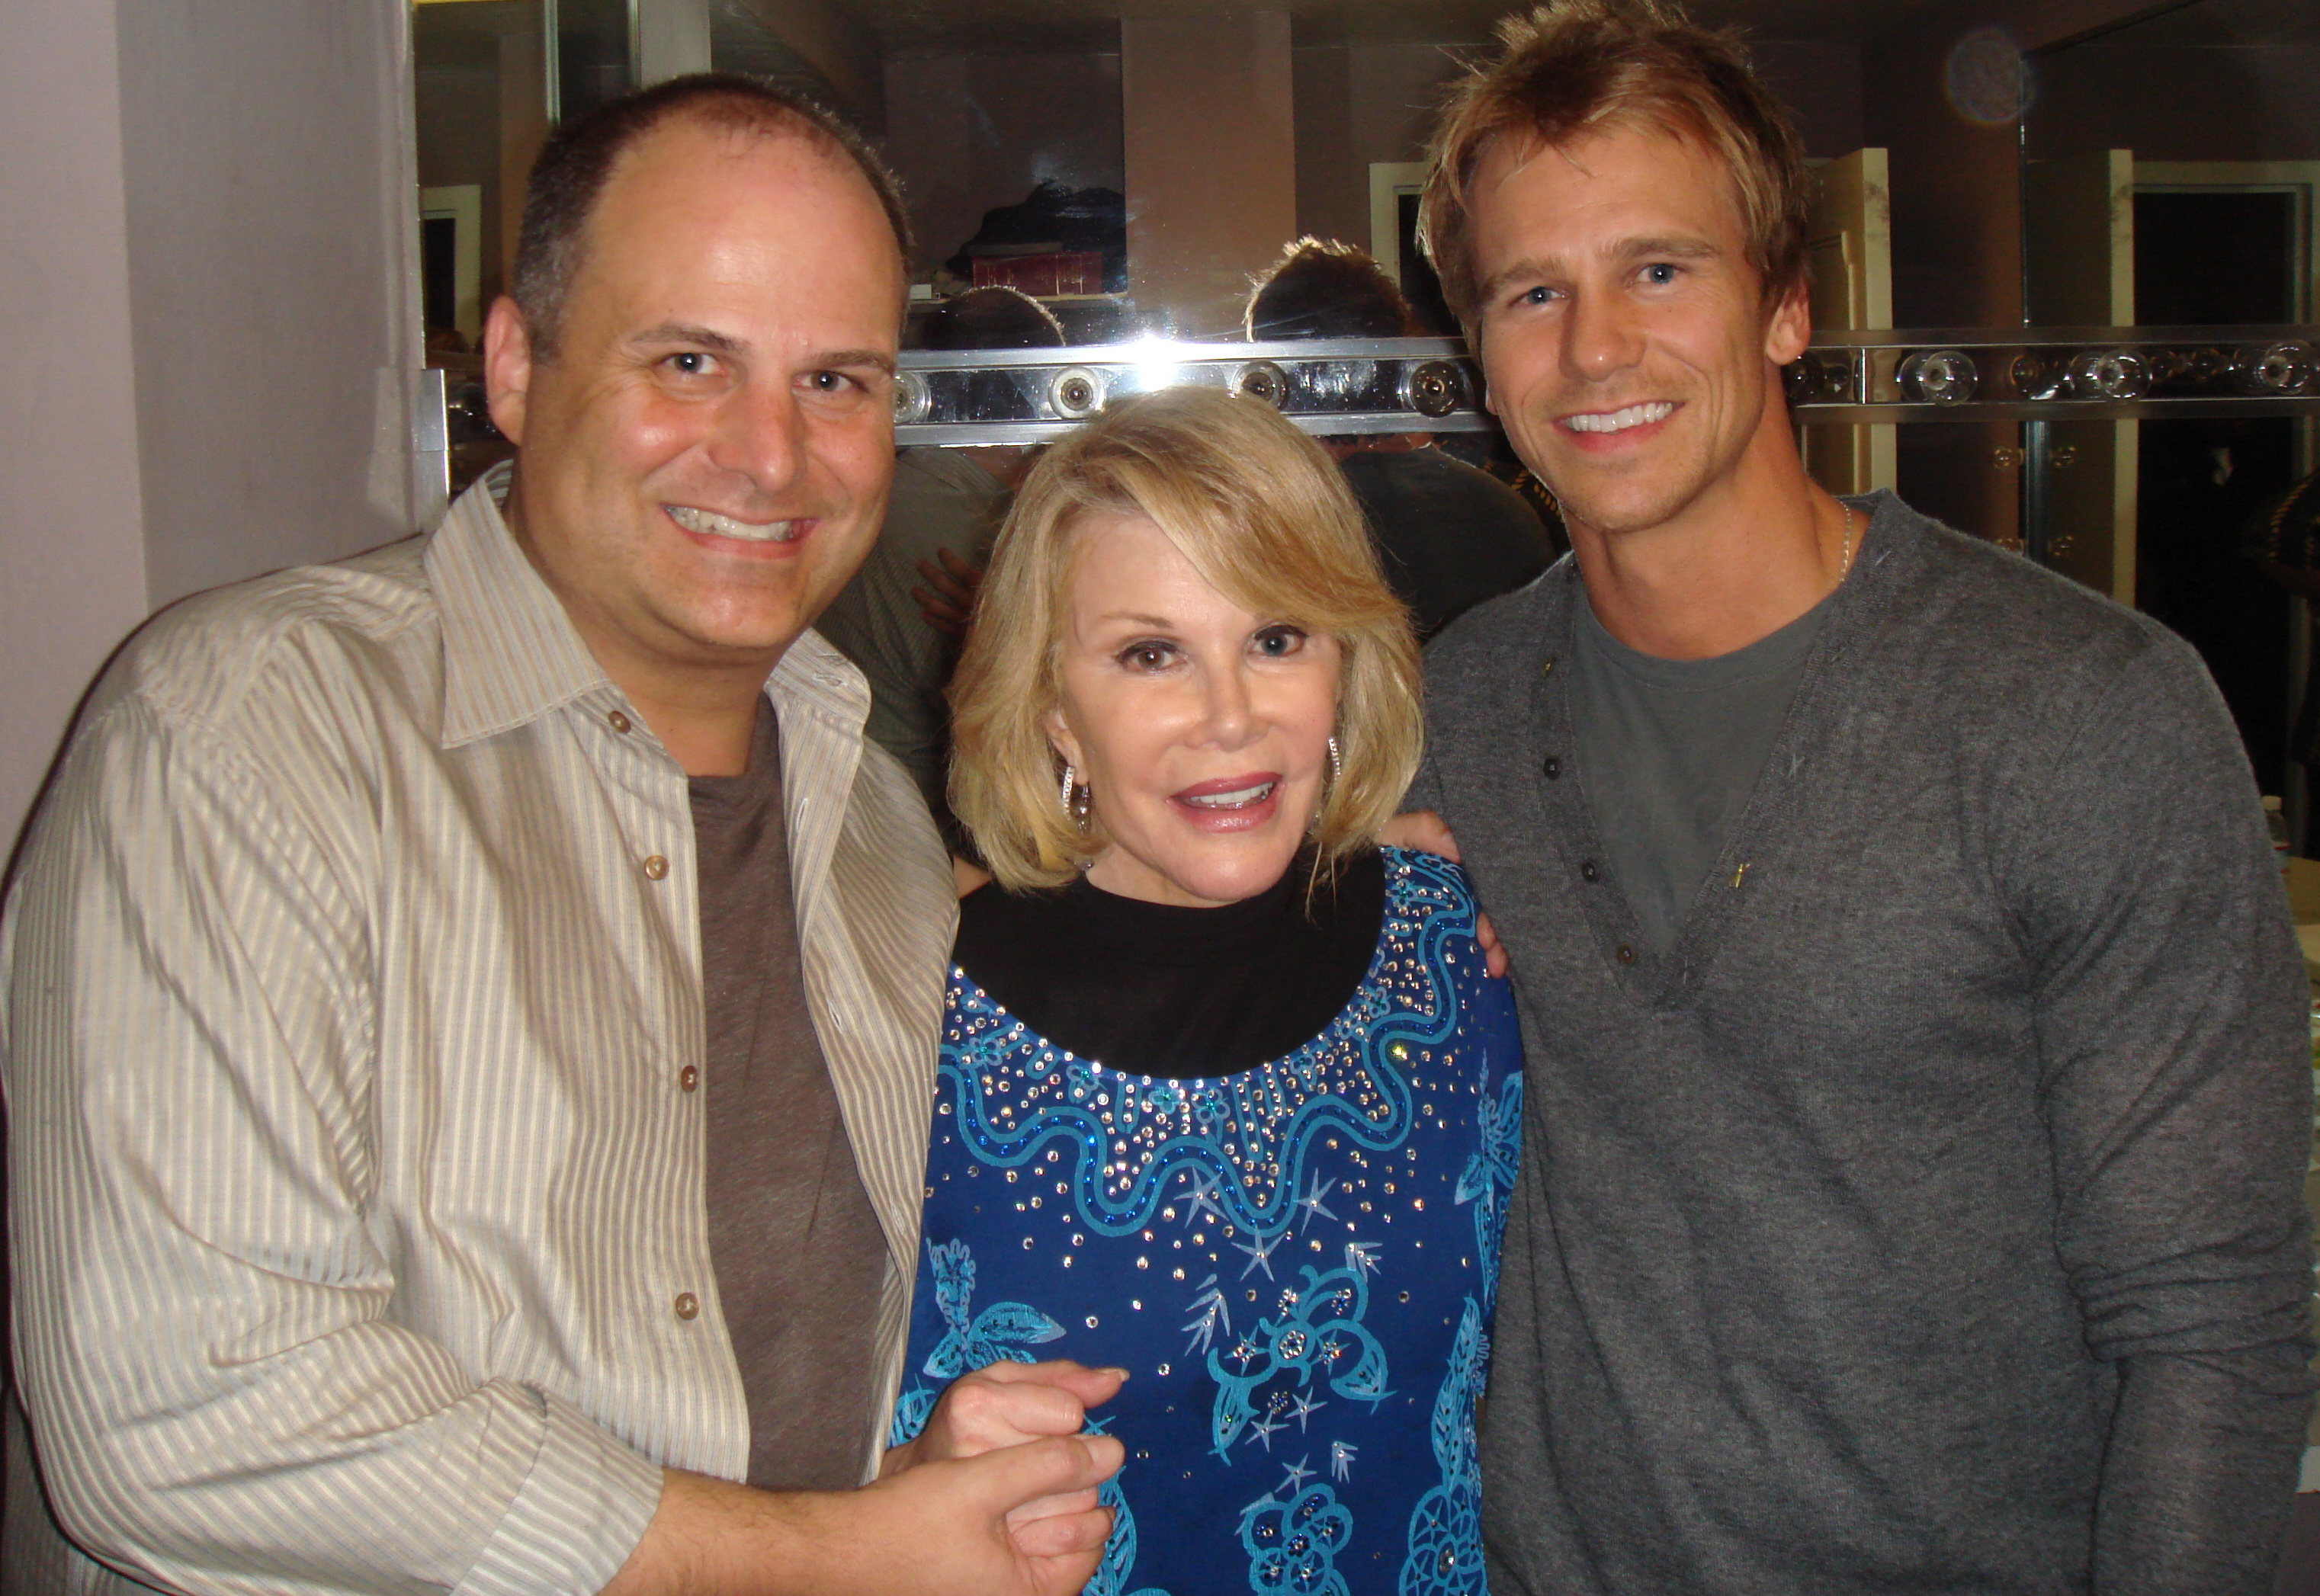 Brian Edwards, Joan Rivers and Rusty Joiner - The Plush Room, San Francisco, CA 31 August 2007